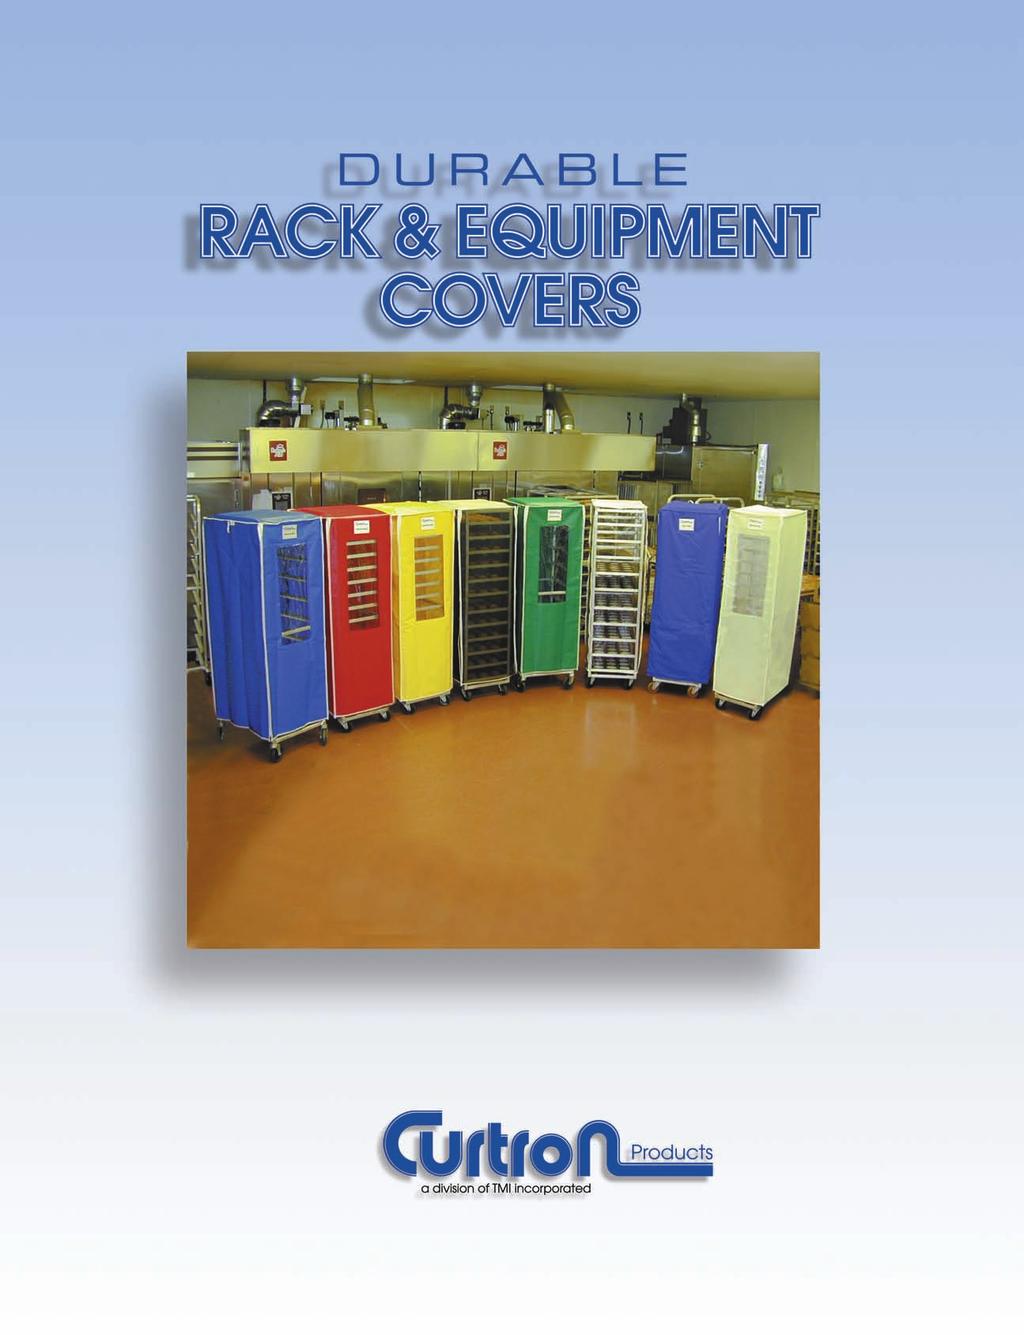 The Most Durable Rack Covers That Offer.